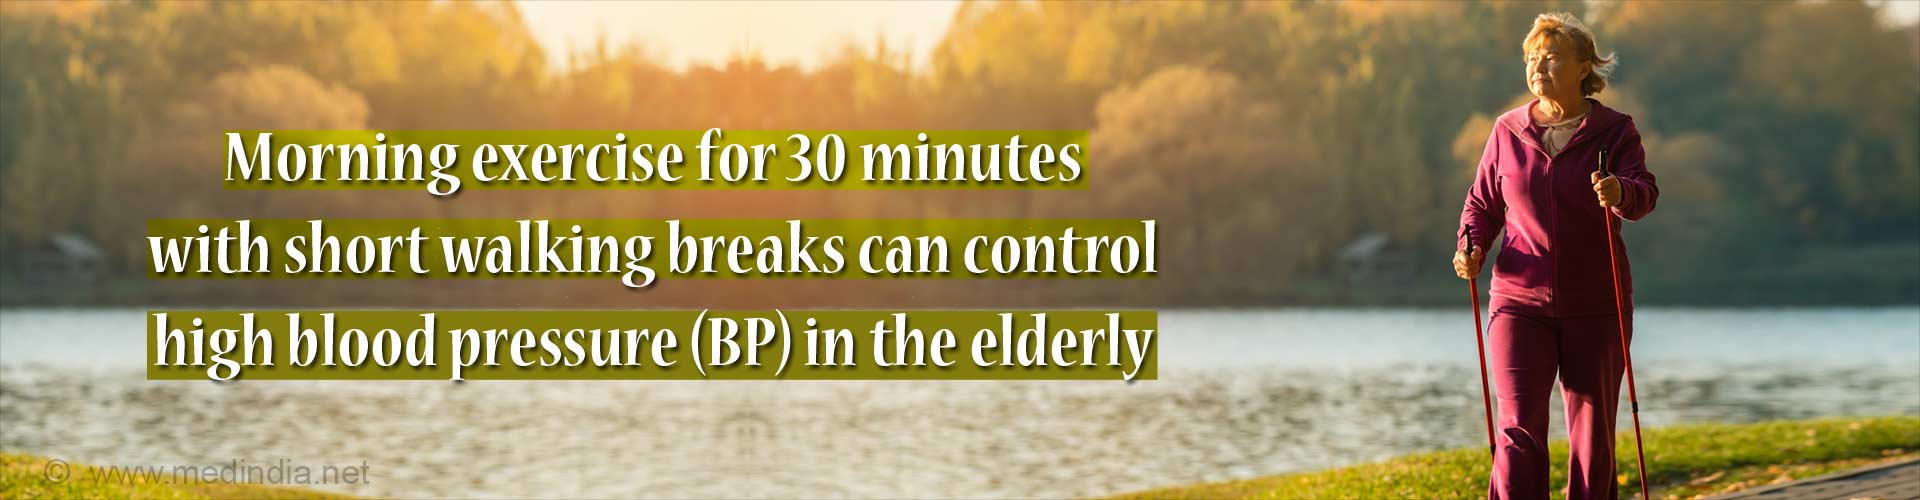 Morning exercise for 30 minutes with short walking breaks can control high blood pressure (BP) in the elderly.